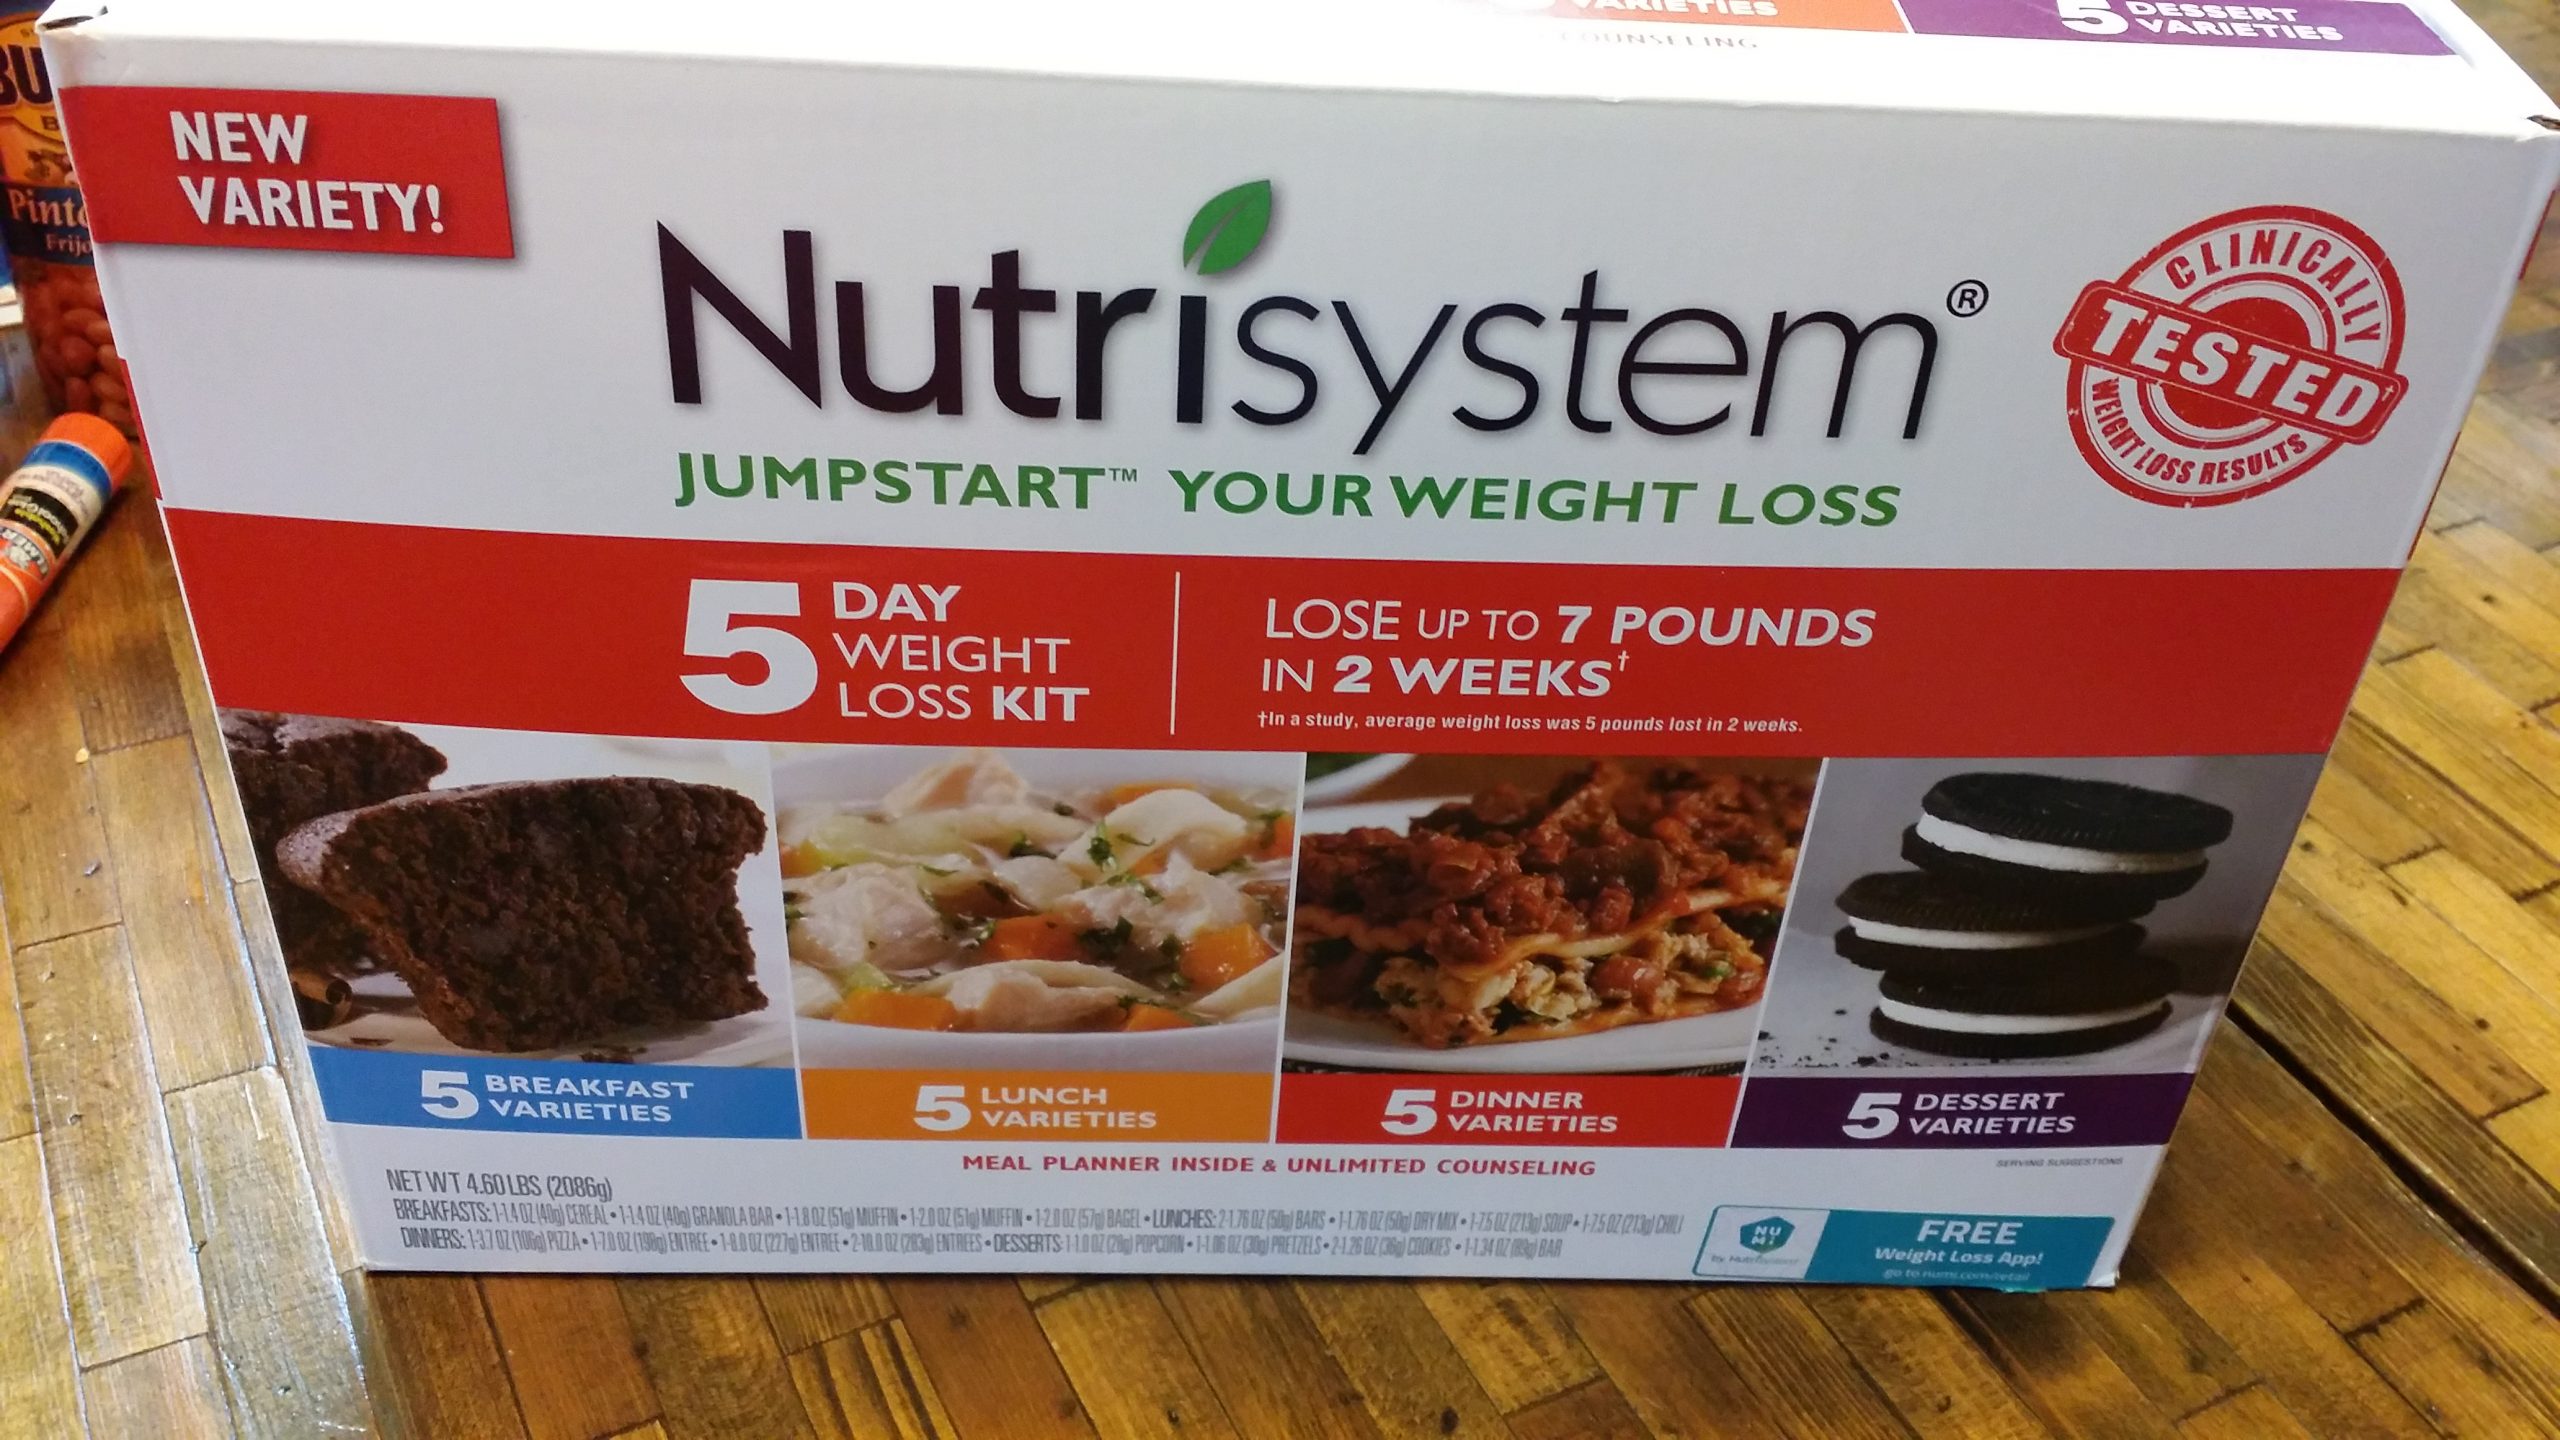 Is it good to Look for Nutrisystem Reviews?